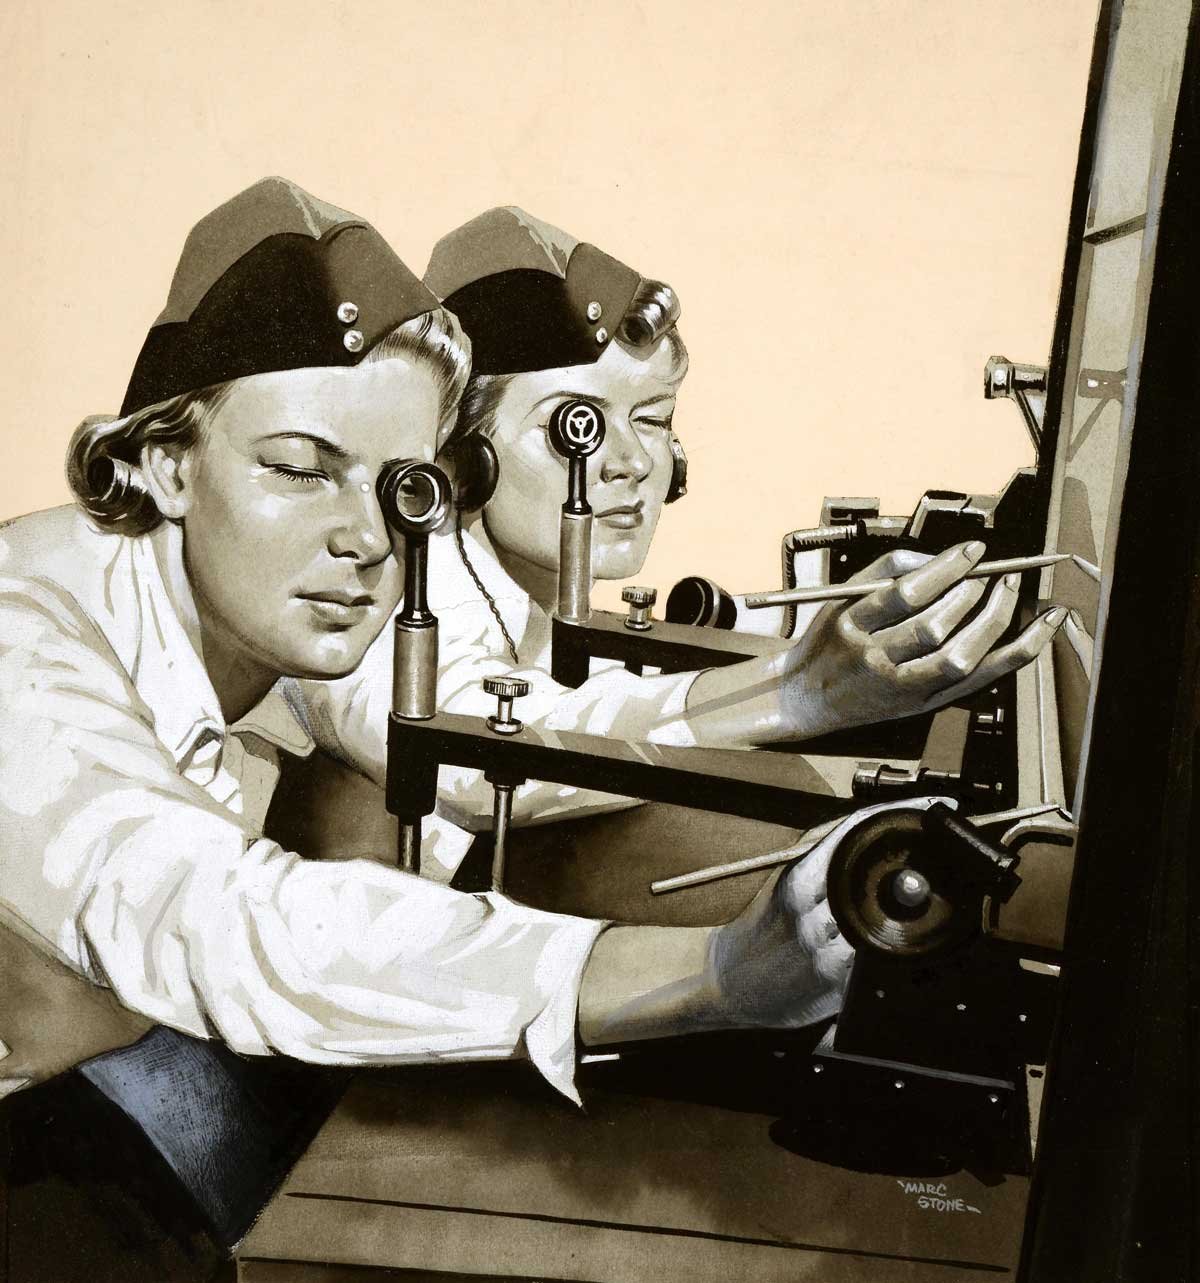 Two women wearing military caps looking into barreled equipment.